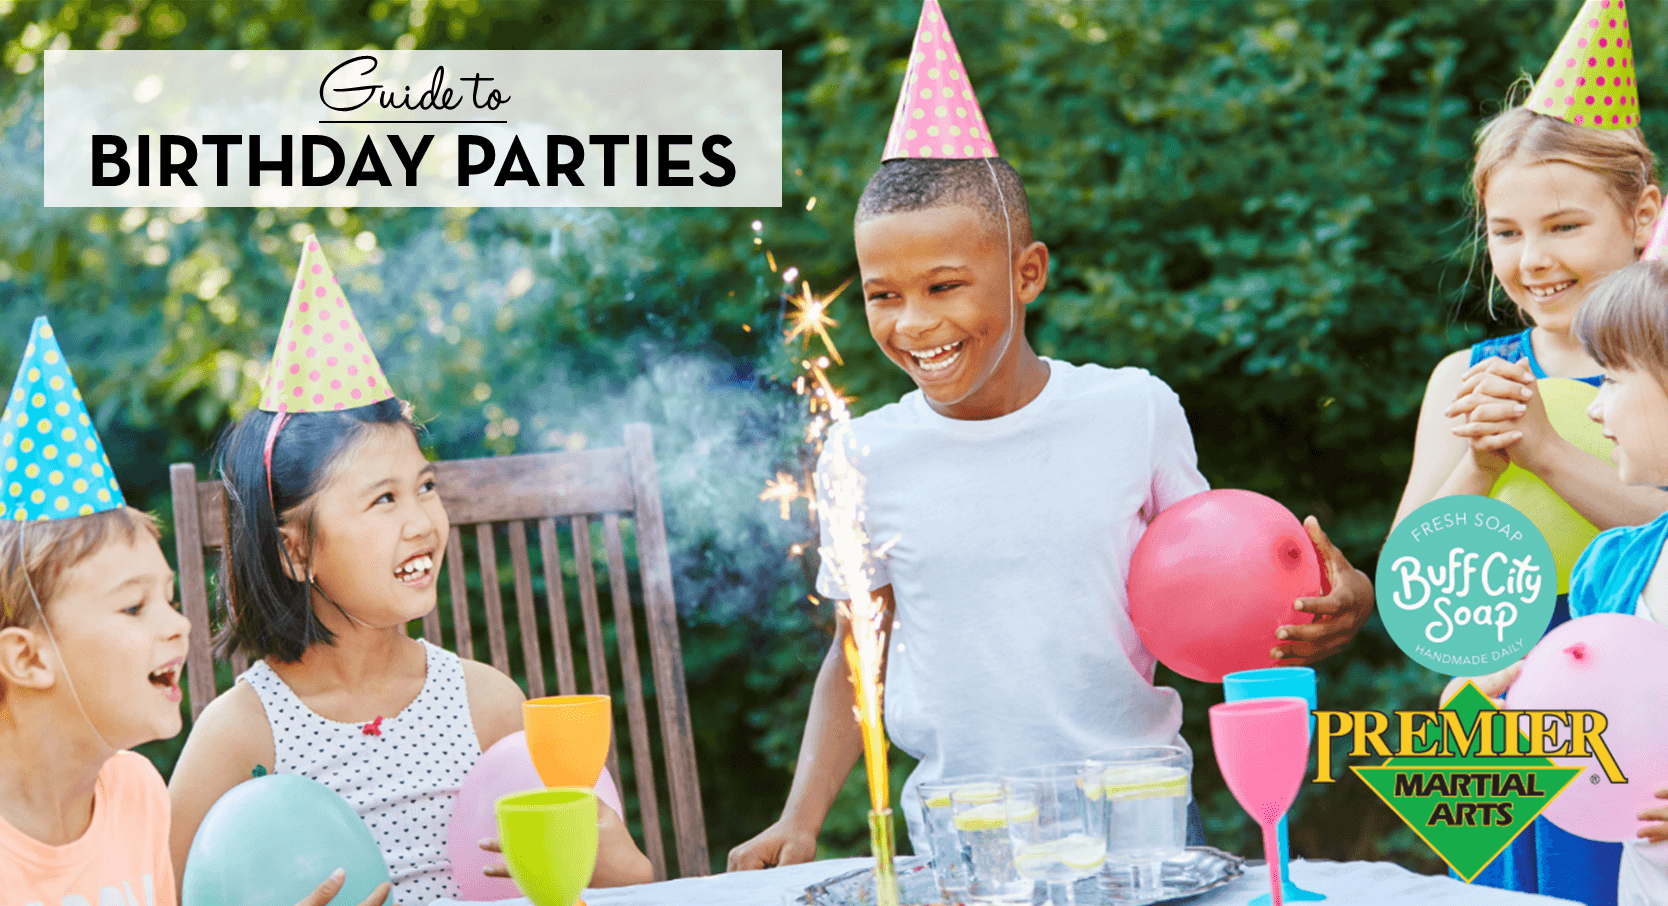 Chattanooga Birthday Party Locations